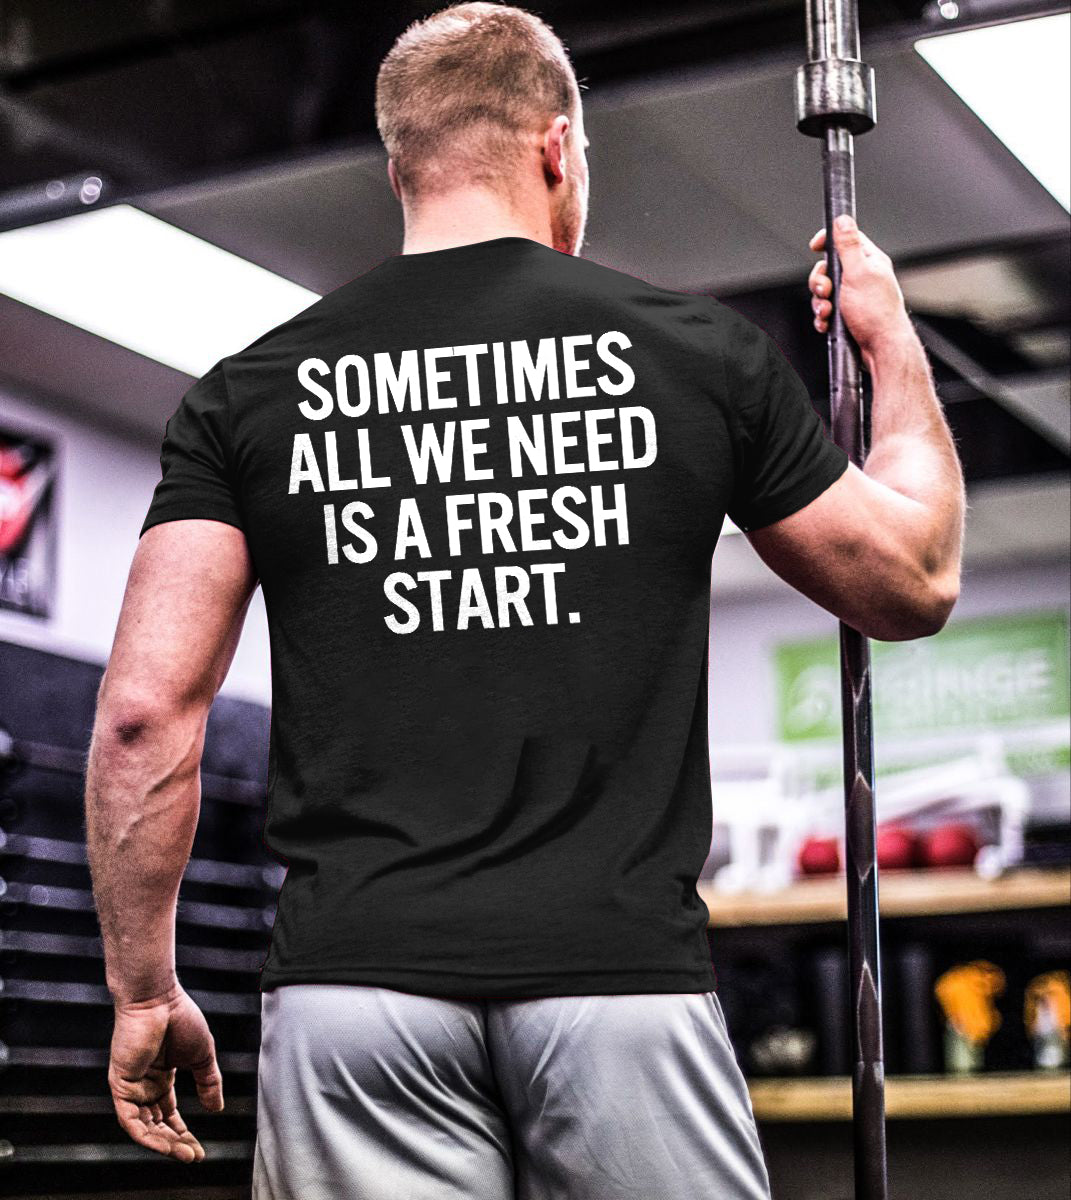 Sometimes All We Need Is A Fresh Start Printed Men's T-shirt